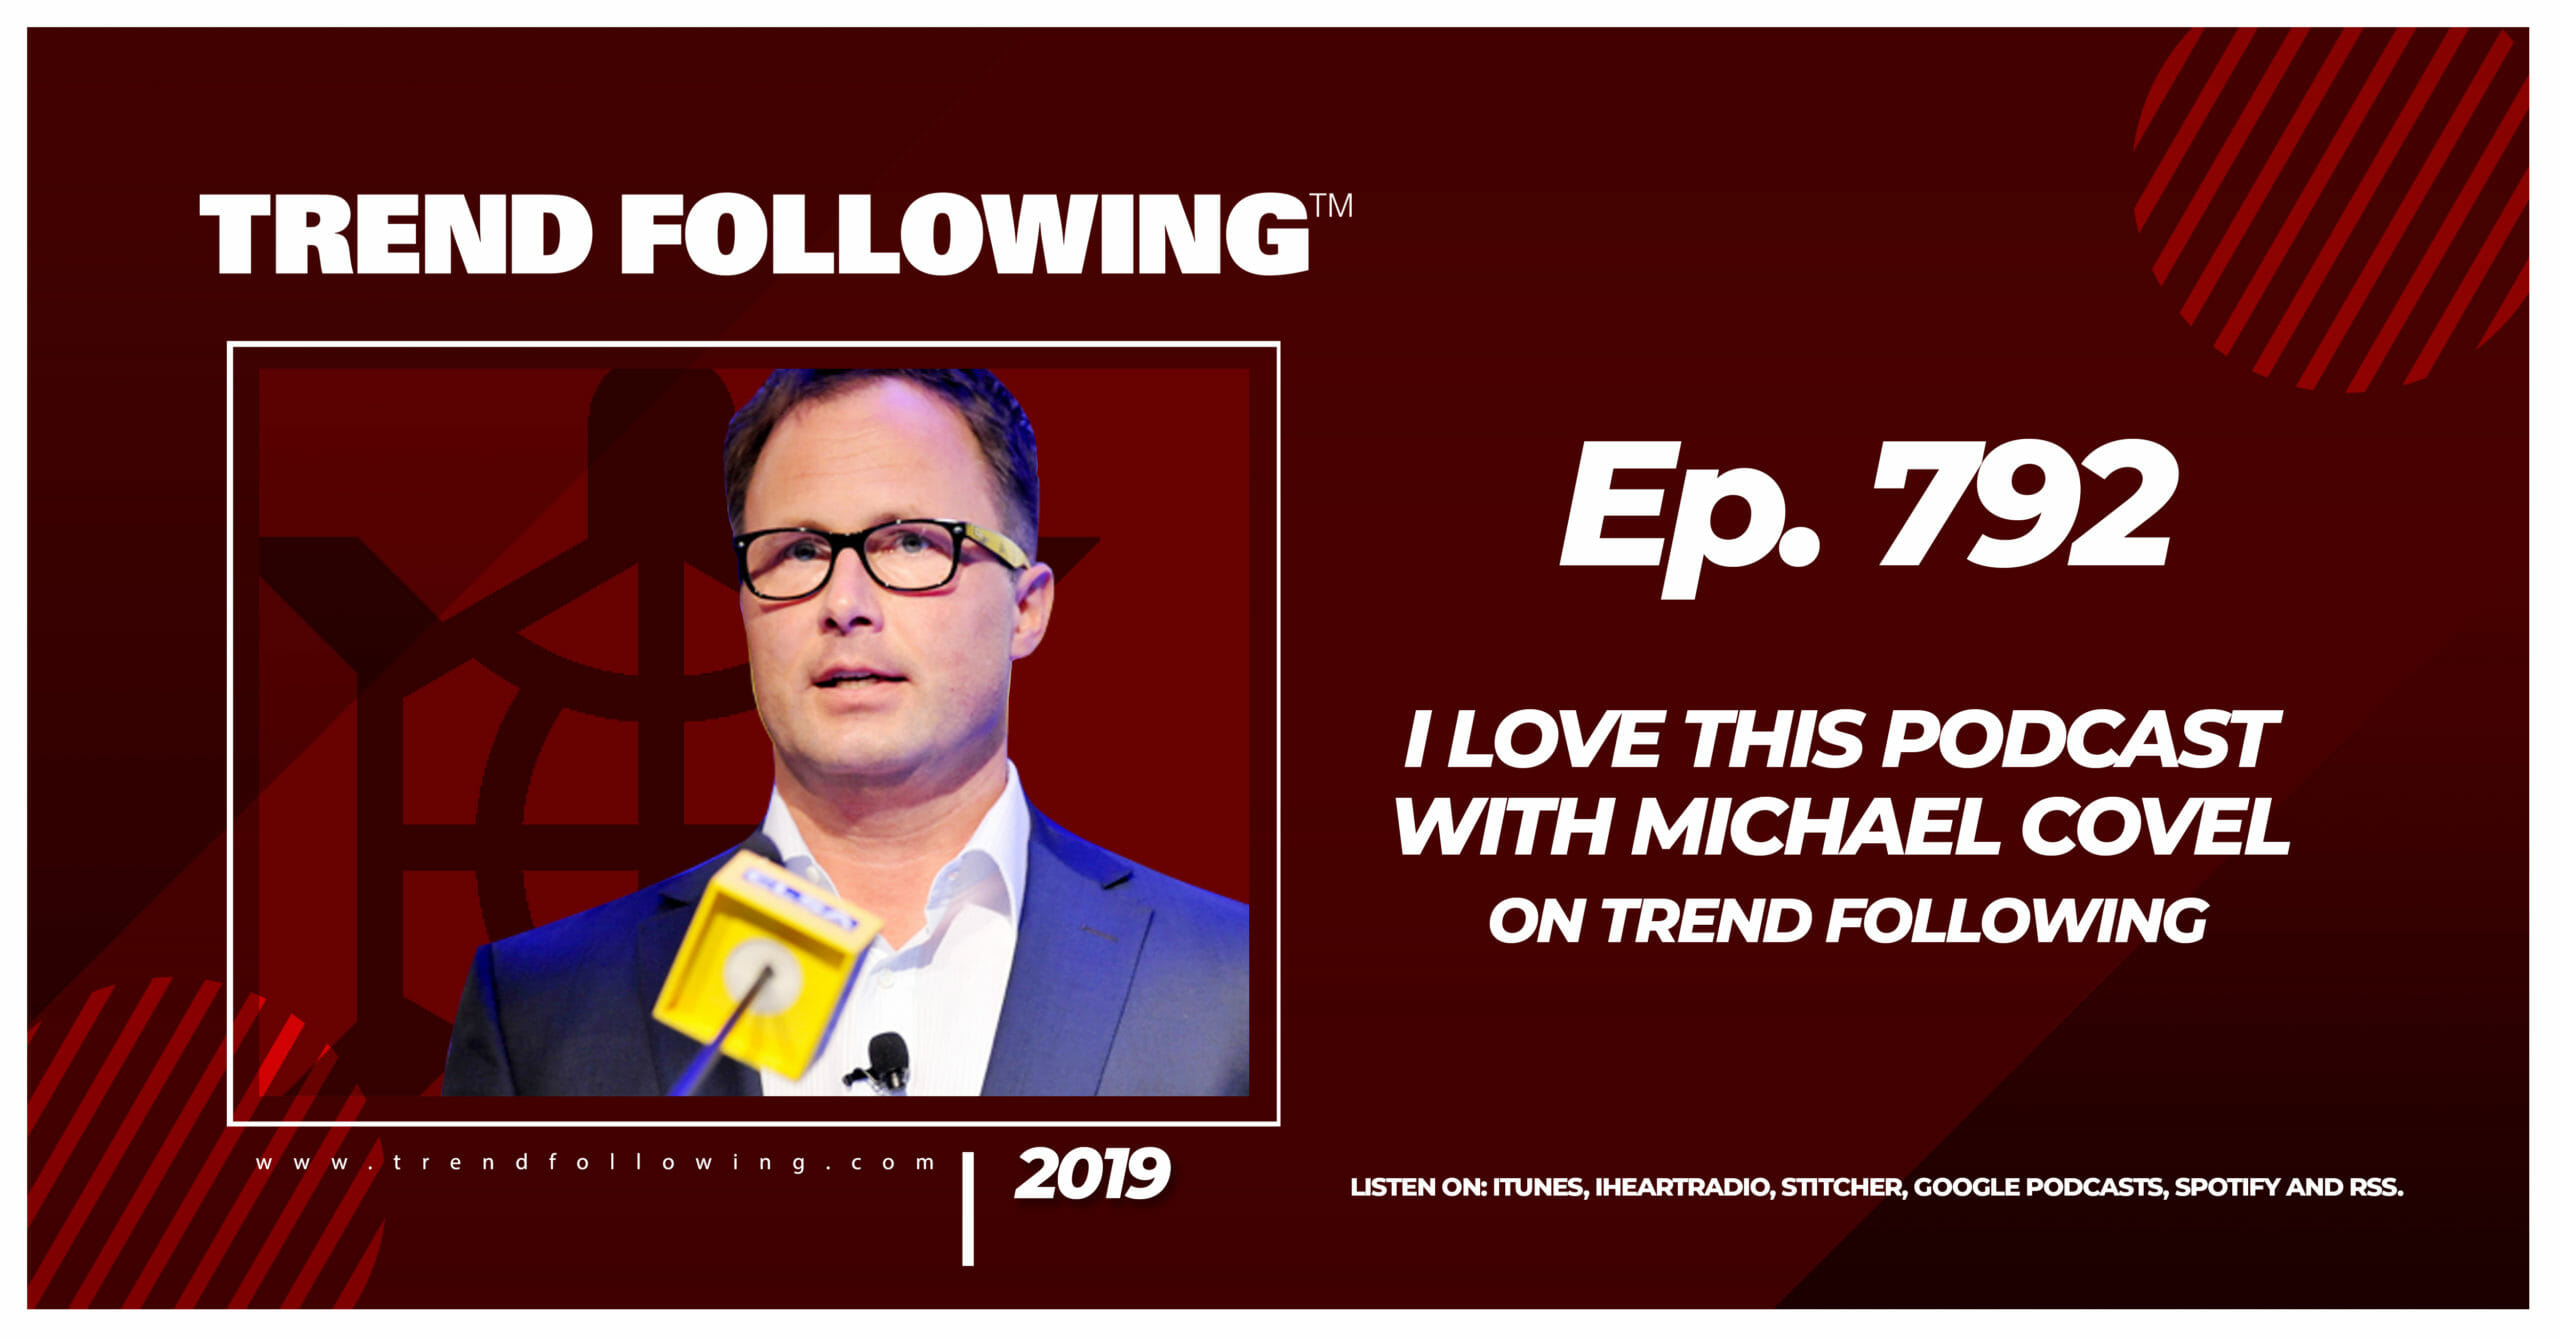 I Love This Podcast with Michael Covel